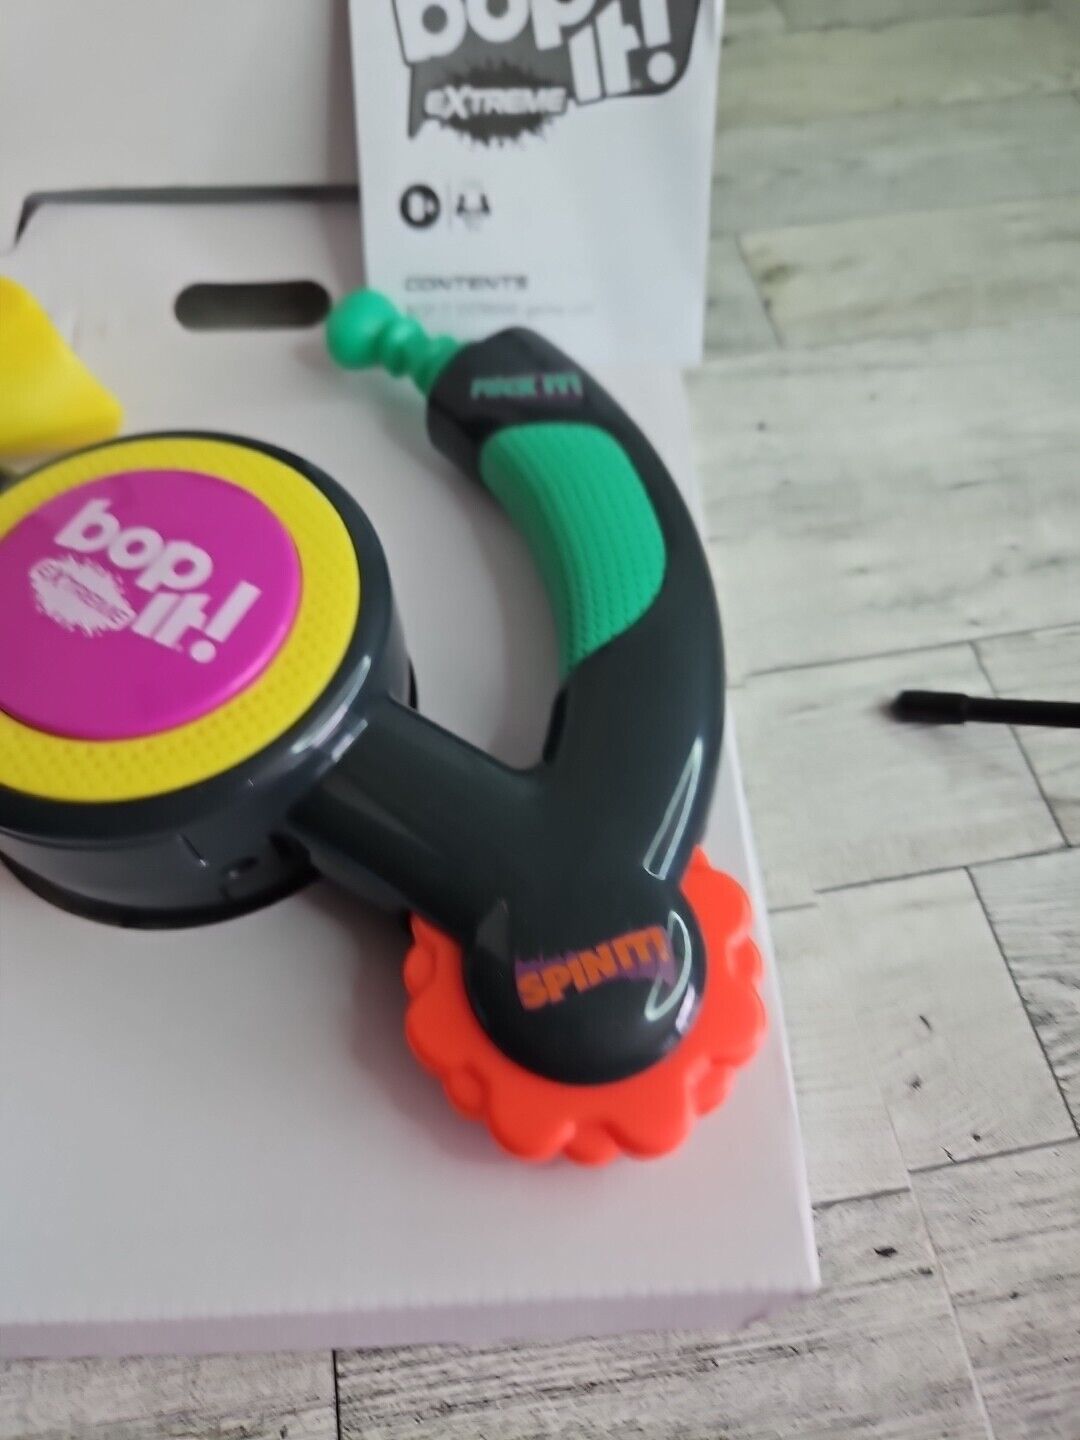 2022 Hasbro Gaming BOP IT Electronic Extreme Toy F5364 Tested And Working Does not apply Does Not Apply - фотография #4